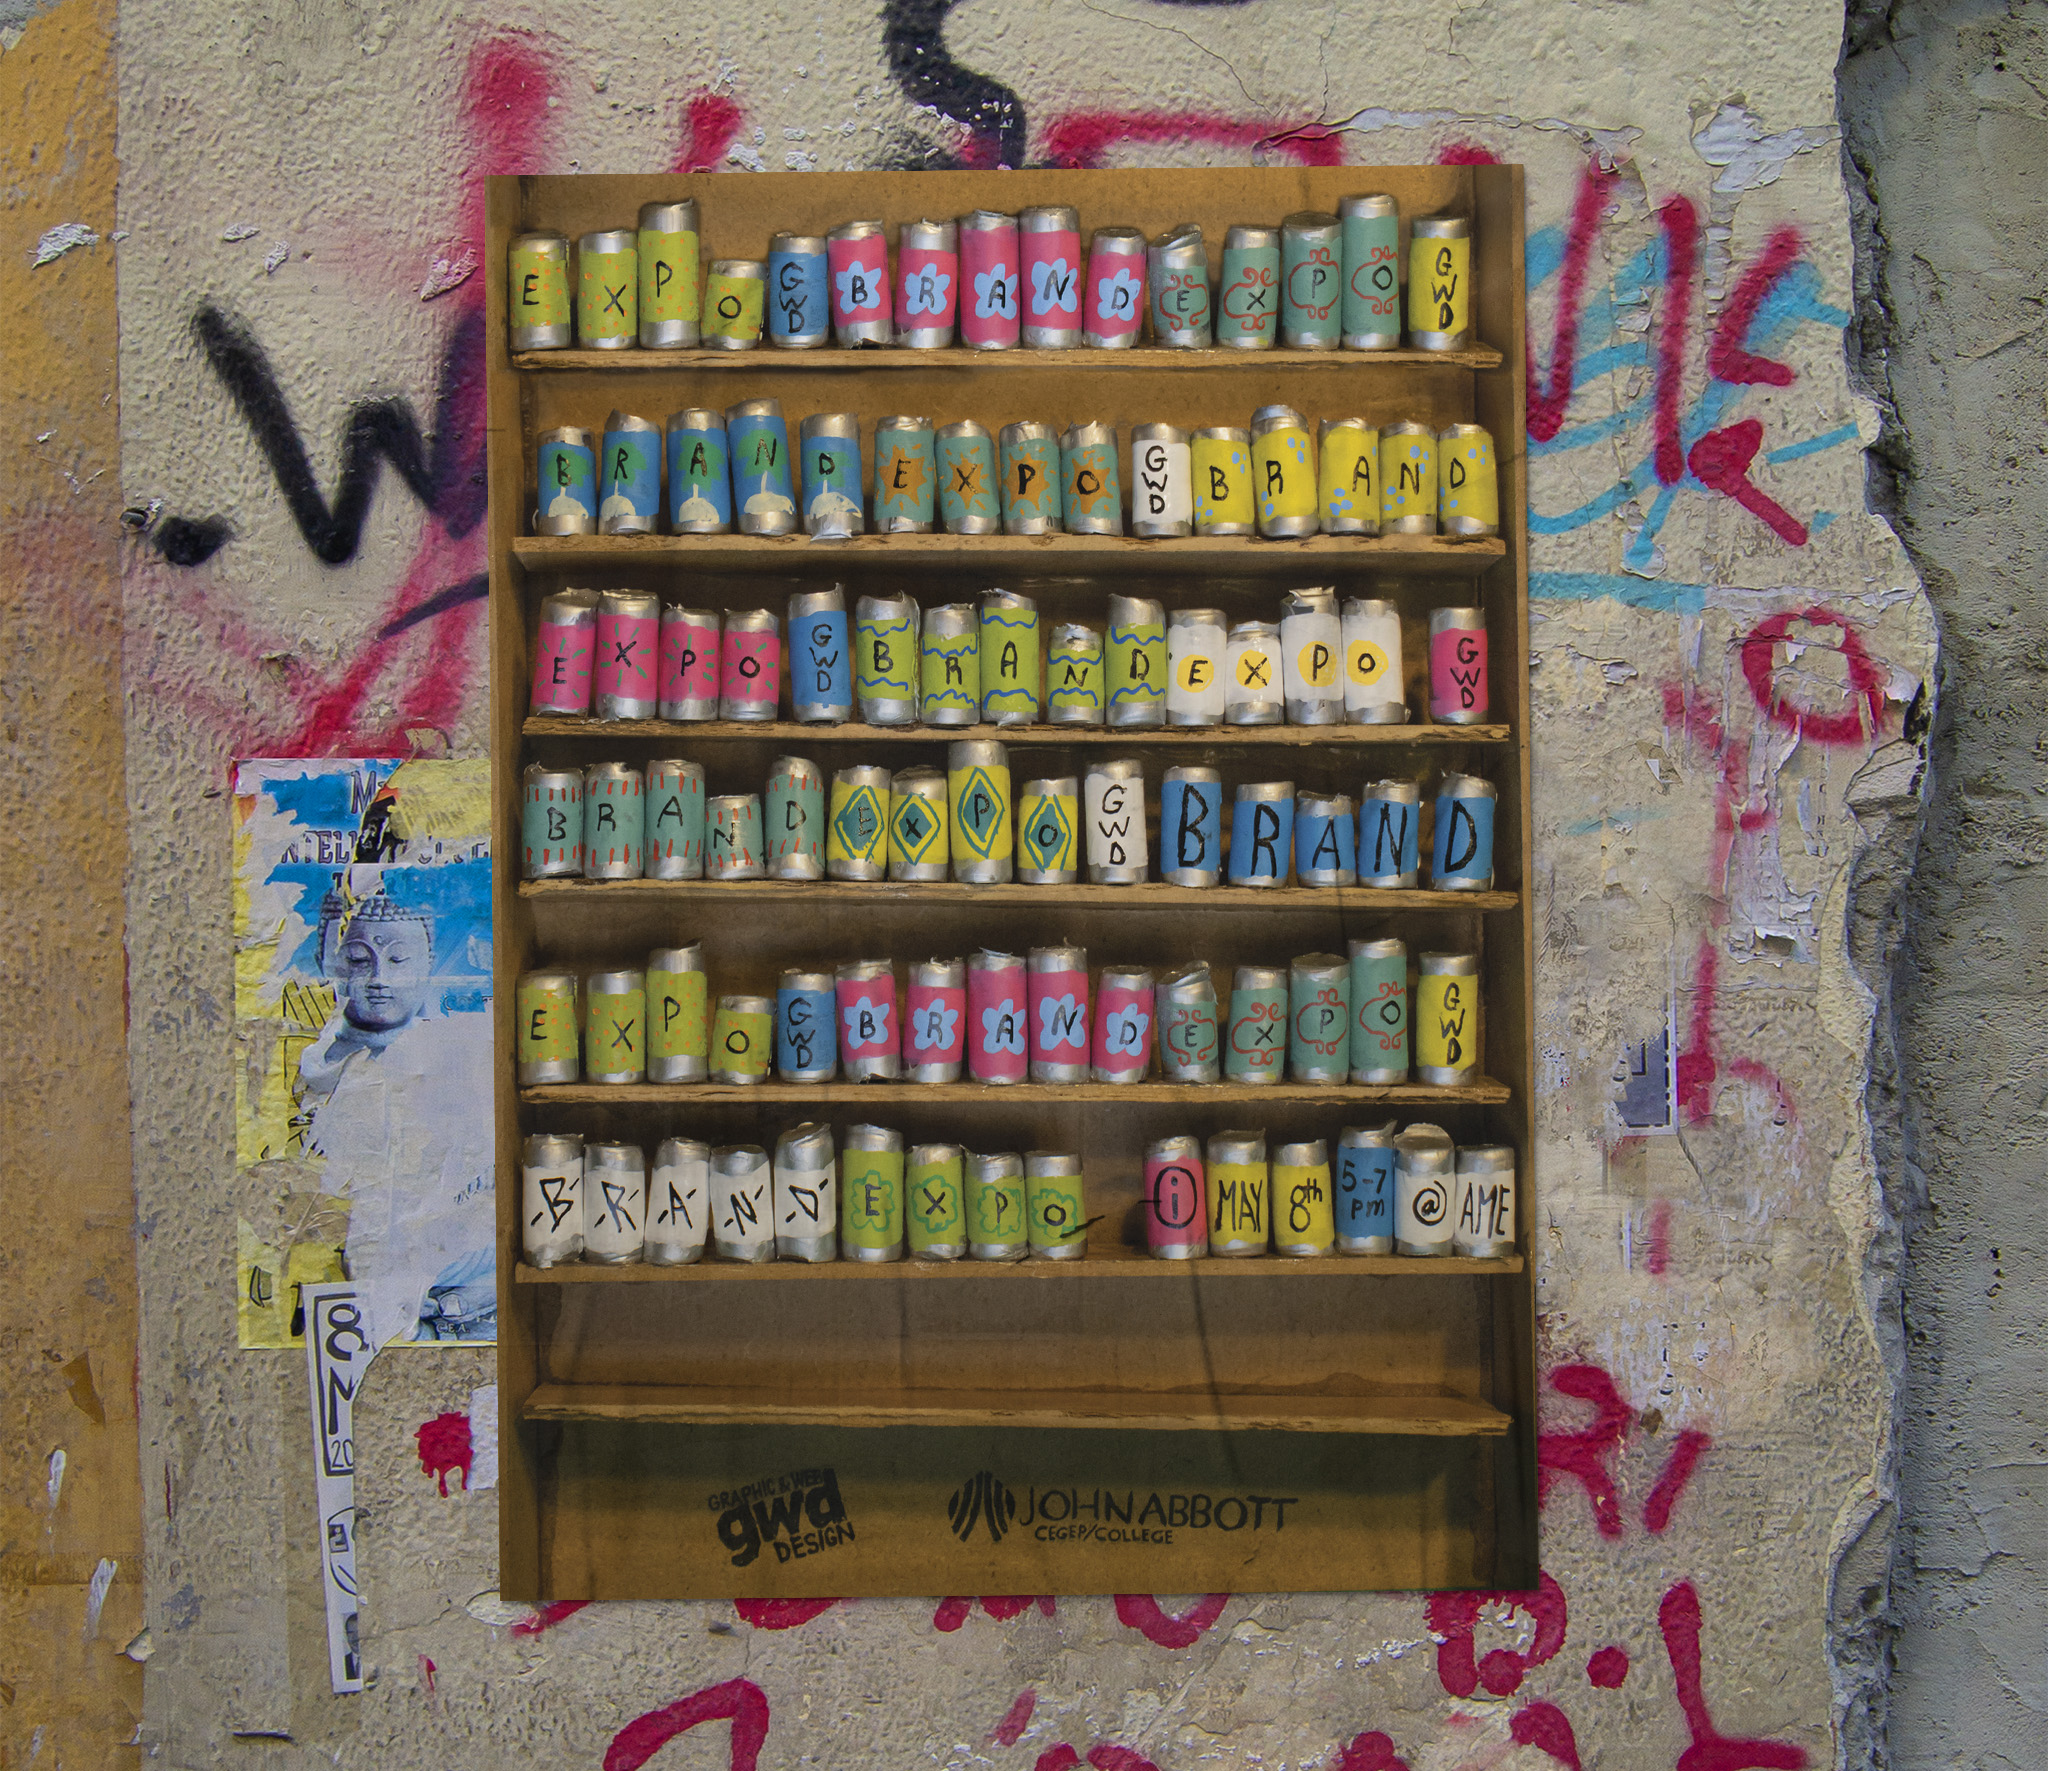 Mockup of poster on grungy wall. The poster features a photo of a miniature shelf with fake cans reading brand expo.